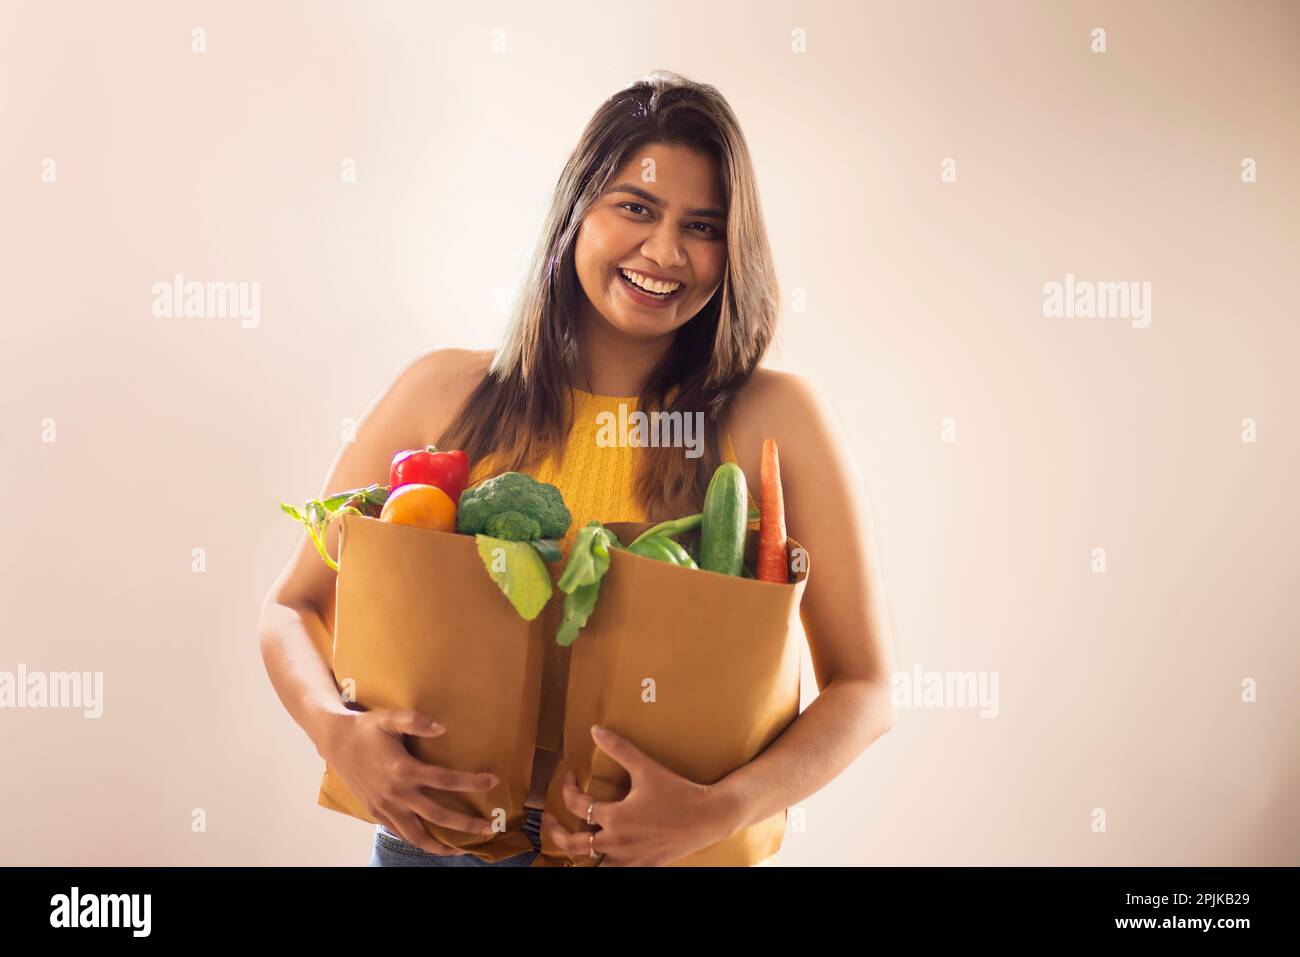 Smiling woman holding bags of fresh vegetables and fruits against white background Stock Photo